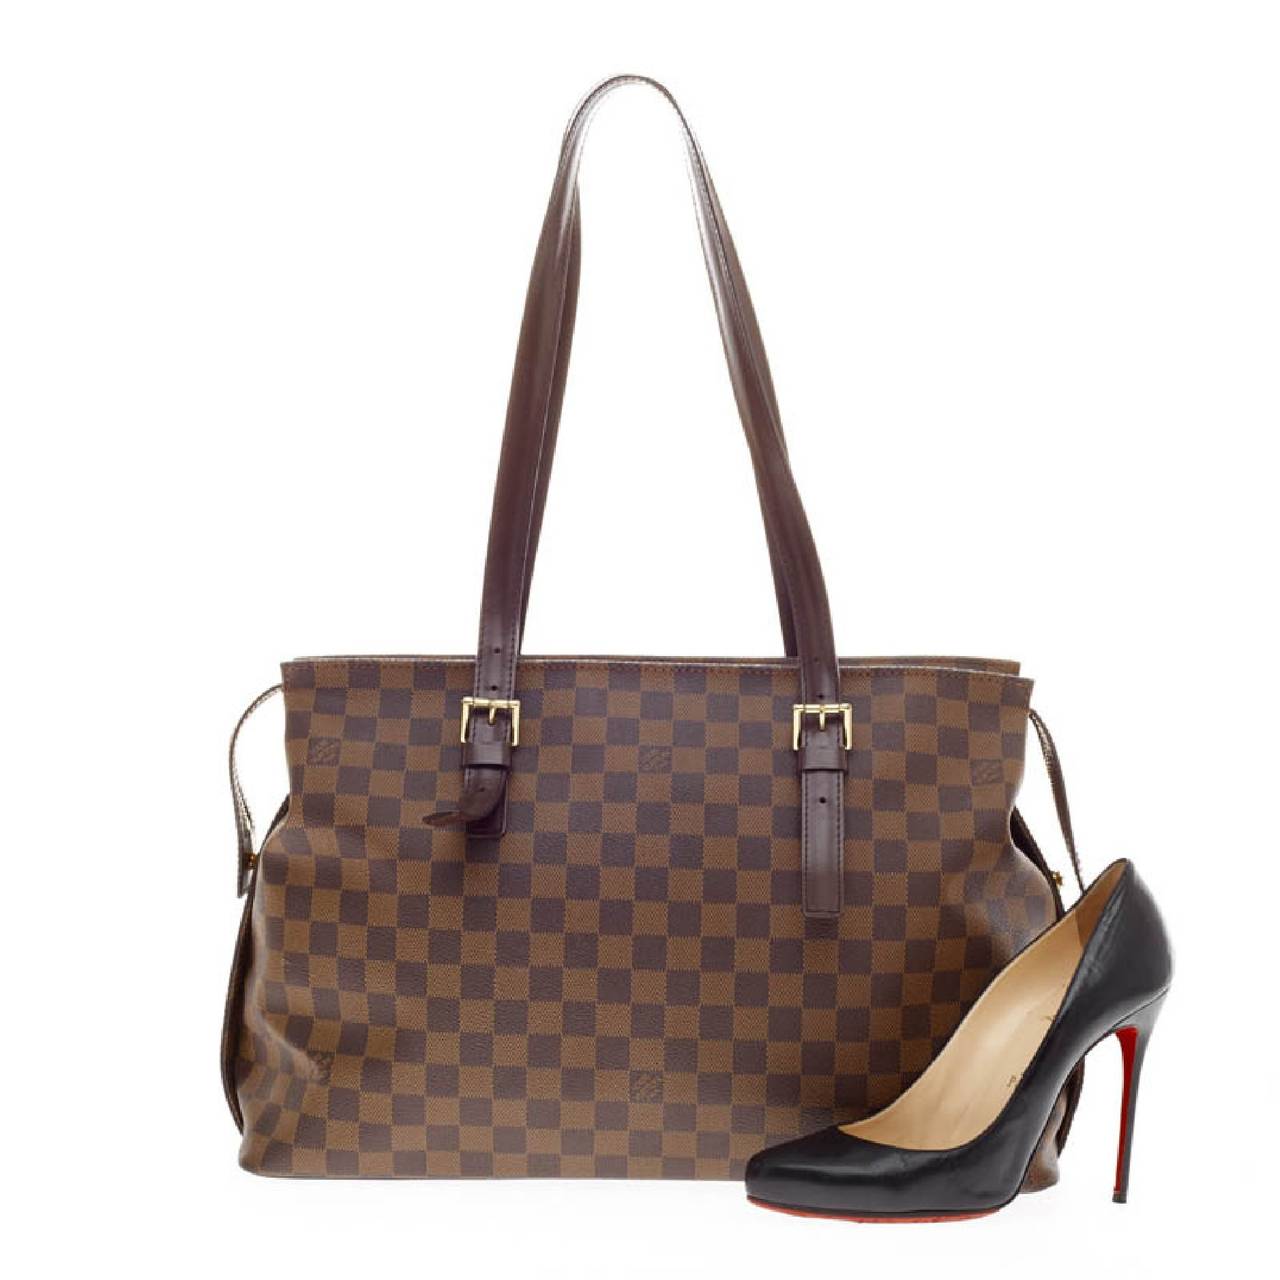 This authentic Louis Vuitton Chelsea Tote Damier combines Louis Vuitton's classic style with sophisticated functionality. It is constructed with the classic Damier Ebene monogram canvas and dark brown leather trims.This coated canvas tote features a